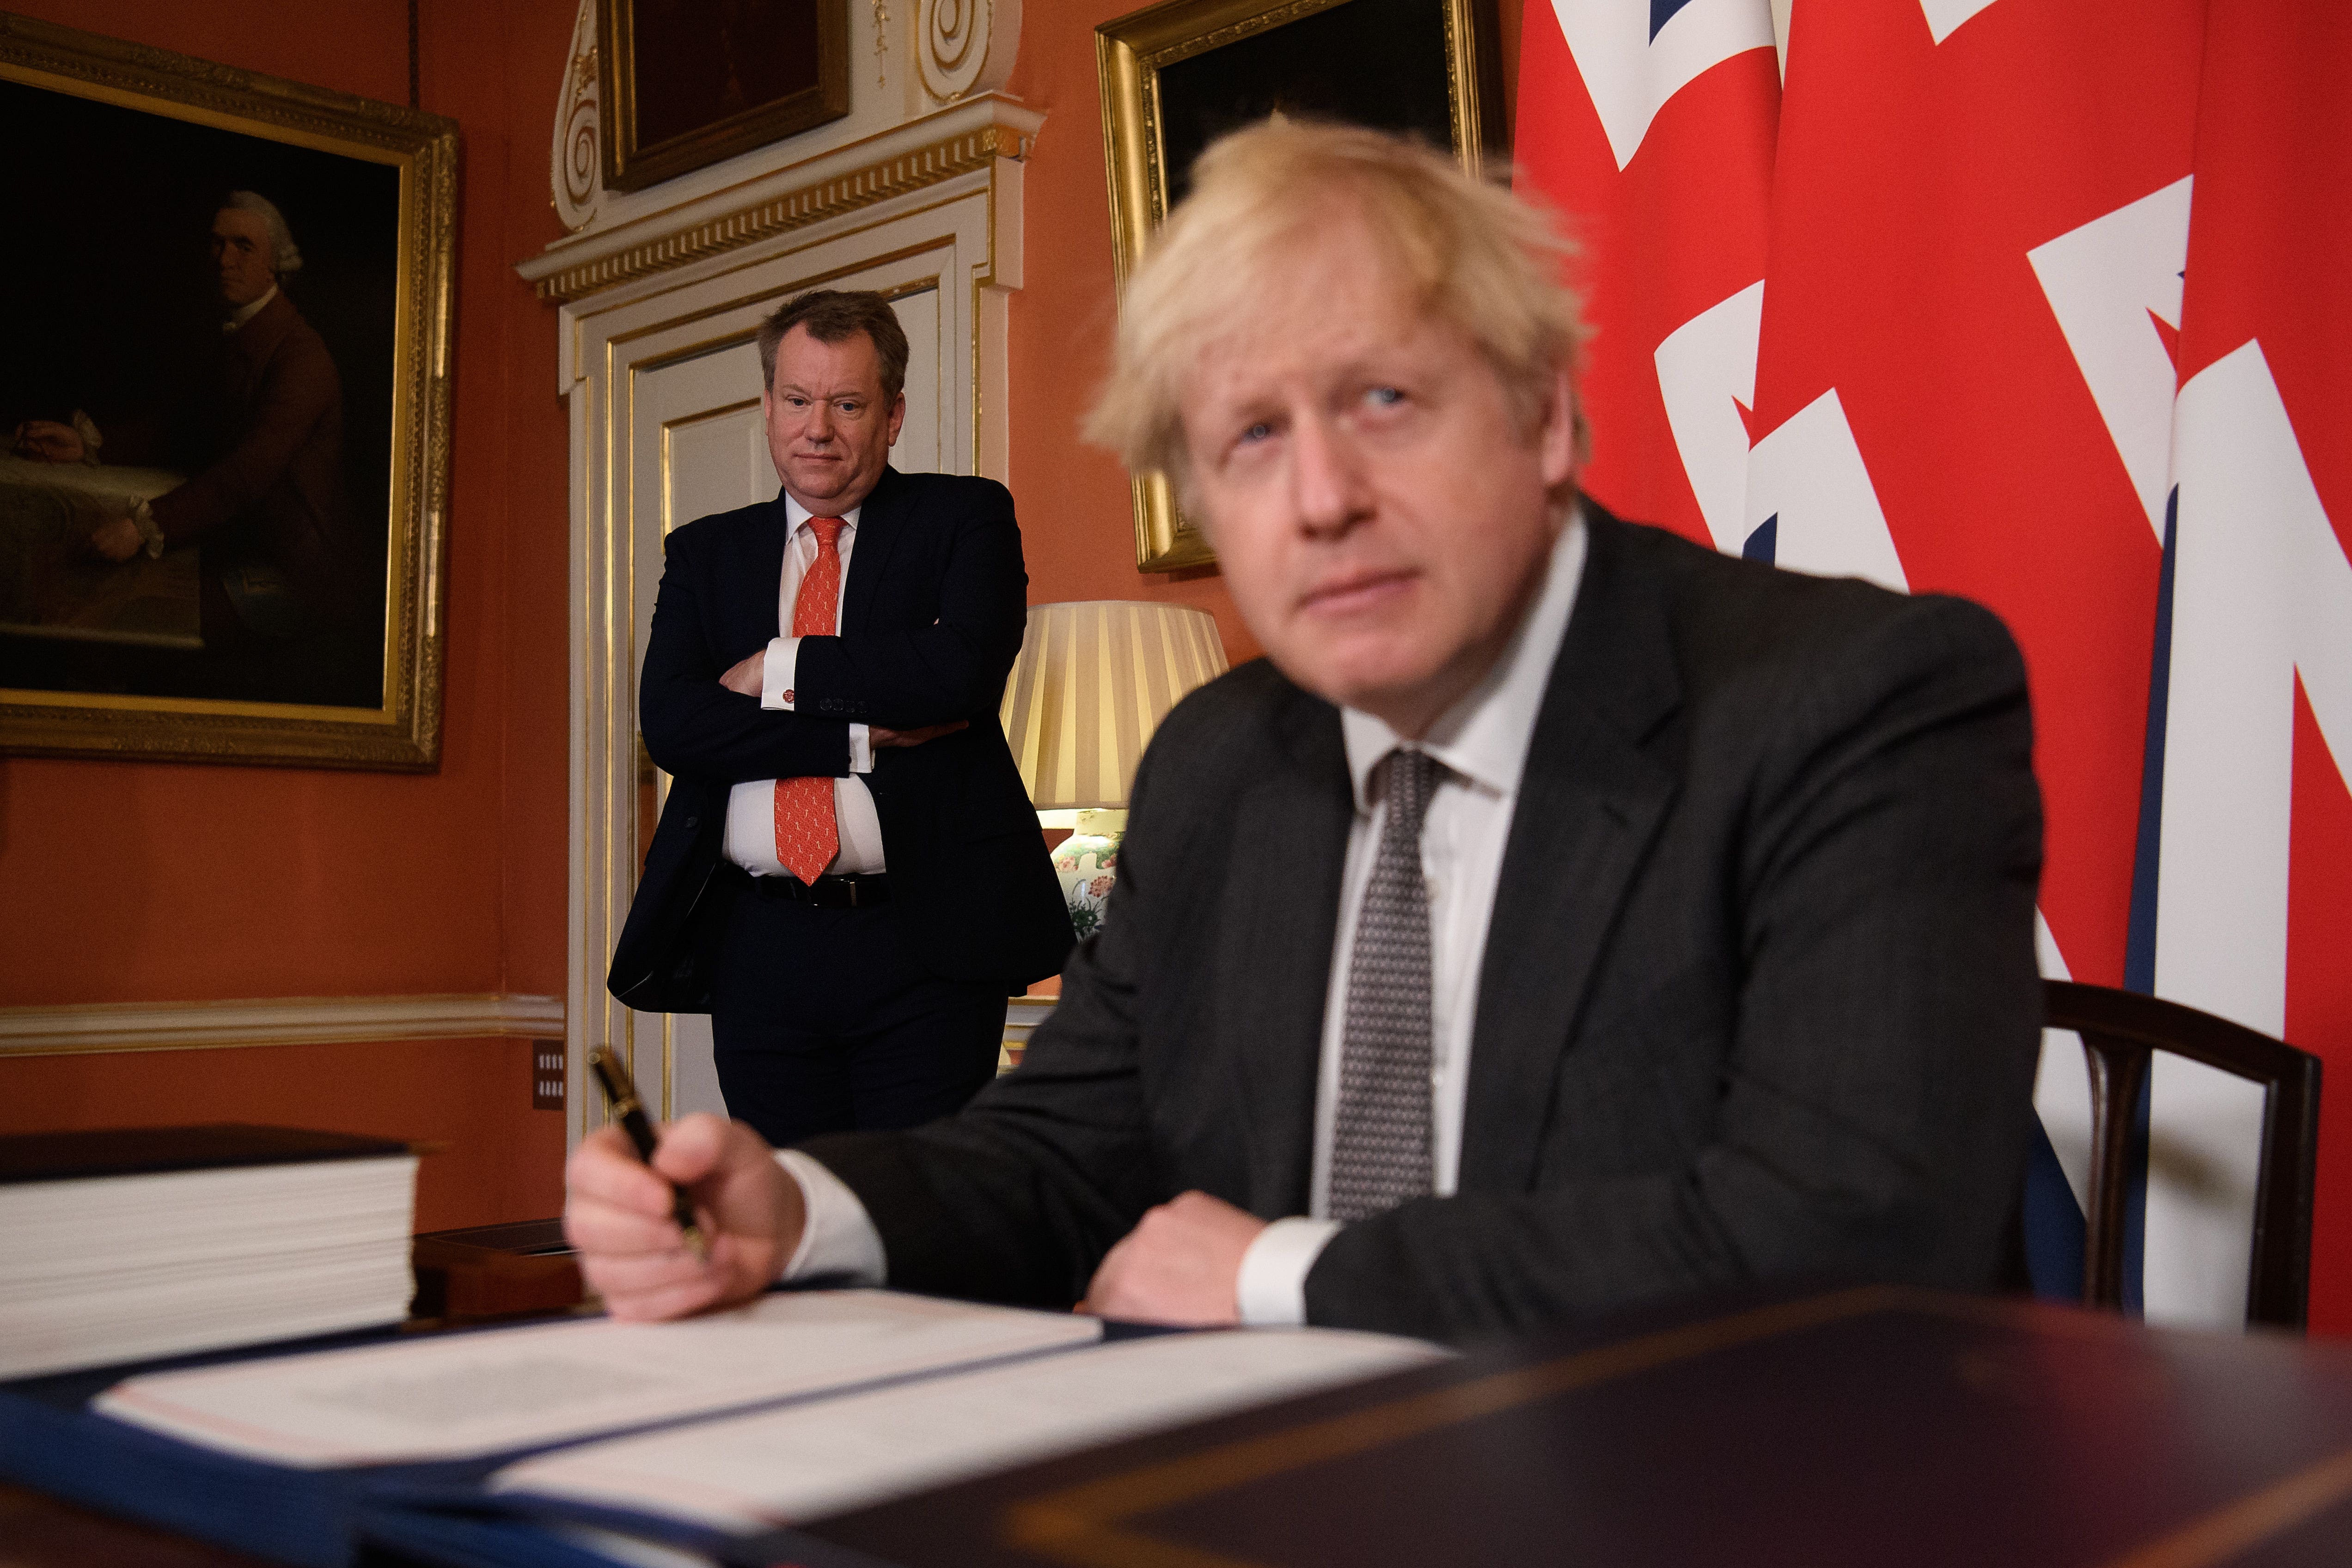 Boris Johnson signs the EU-UK Trade and Co-operation Agreement at 10 Downing Street as UK chief trade negotiator David Frost looks on